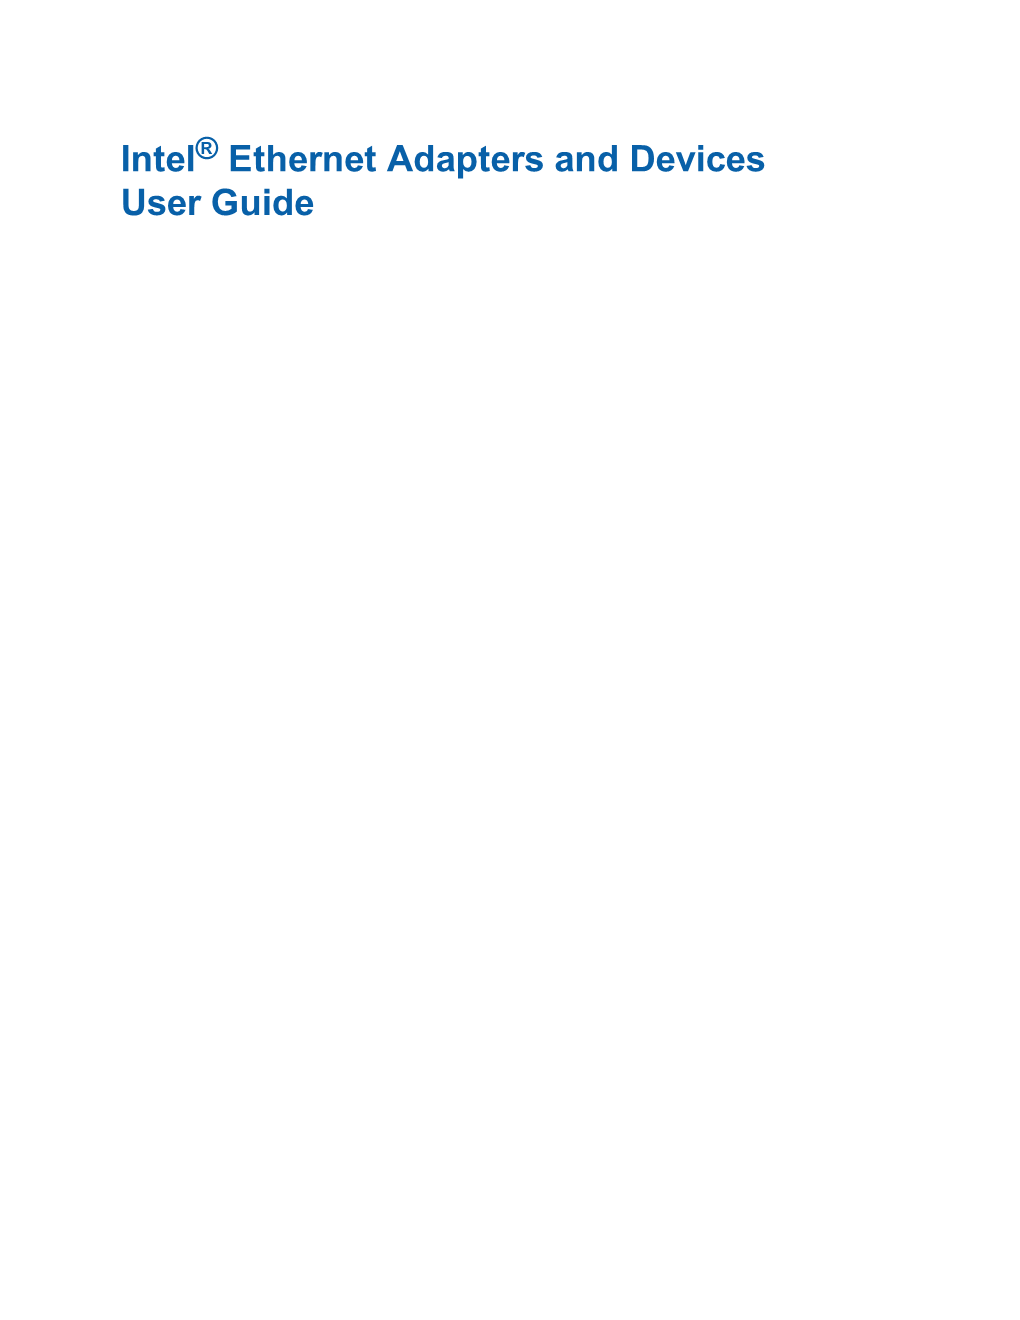 Intel® Ethernet Adapters and Devices User Guide Overview Welcome to the User's Guide for Intel® Ethernet Adapters and Devices